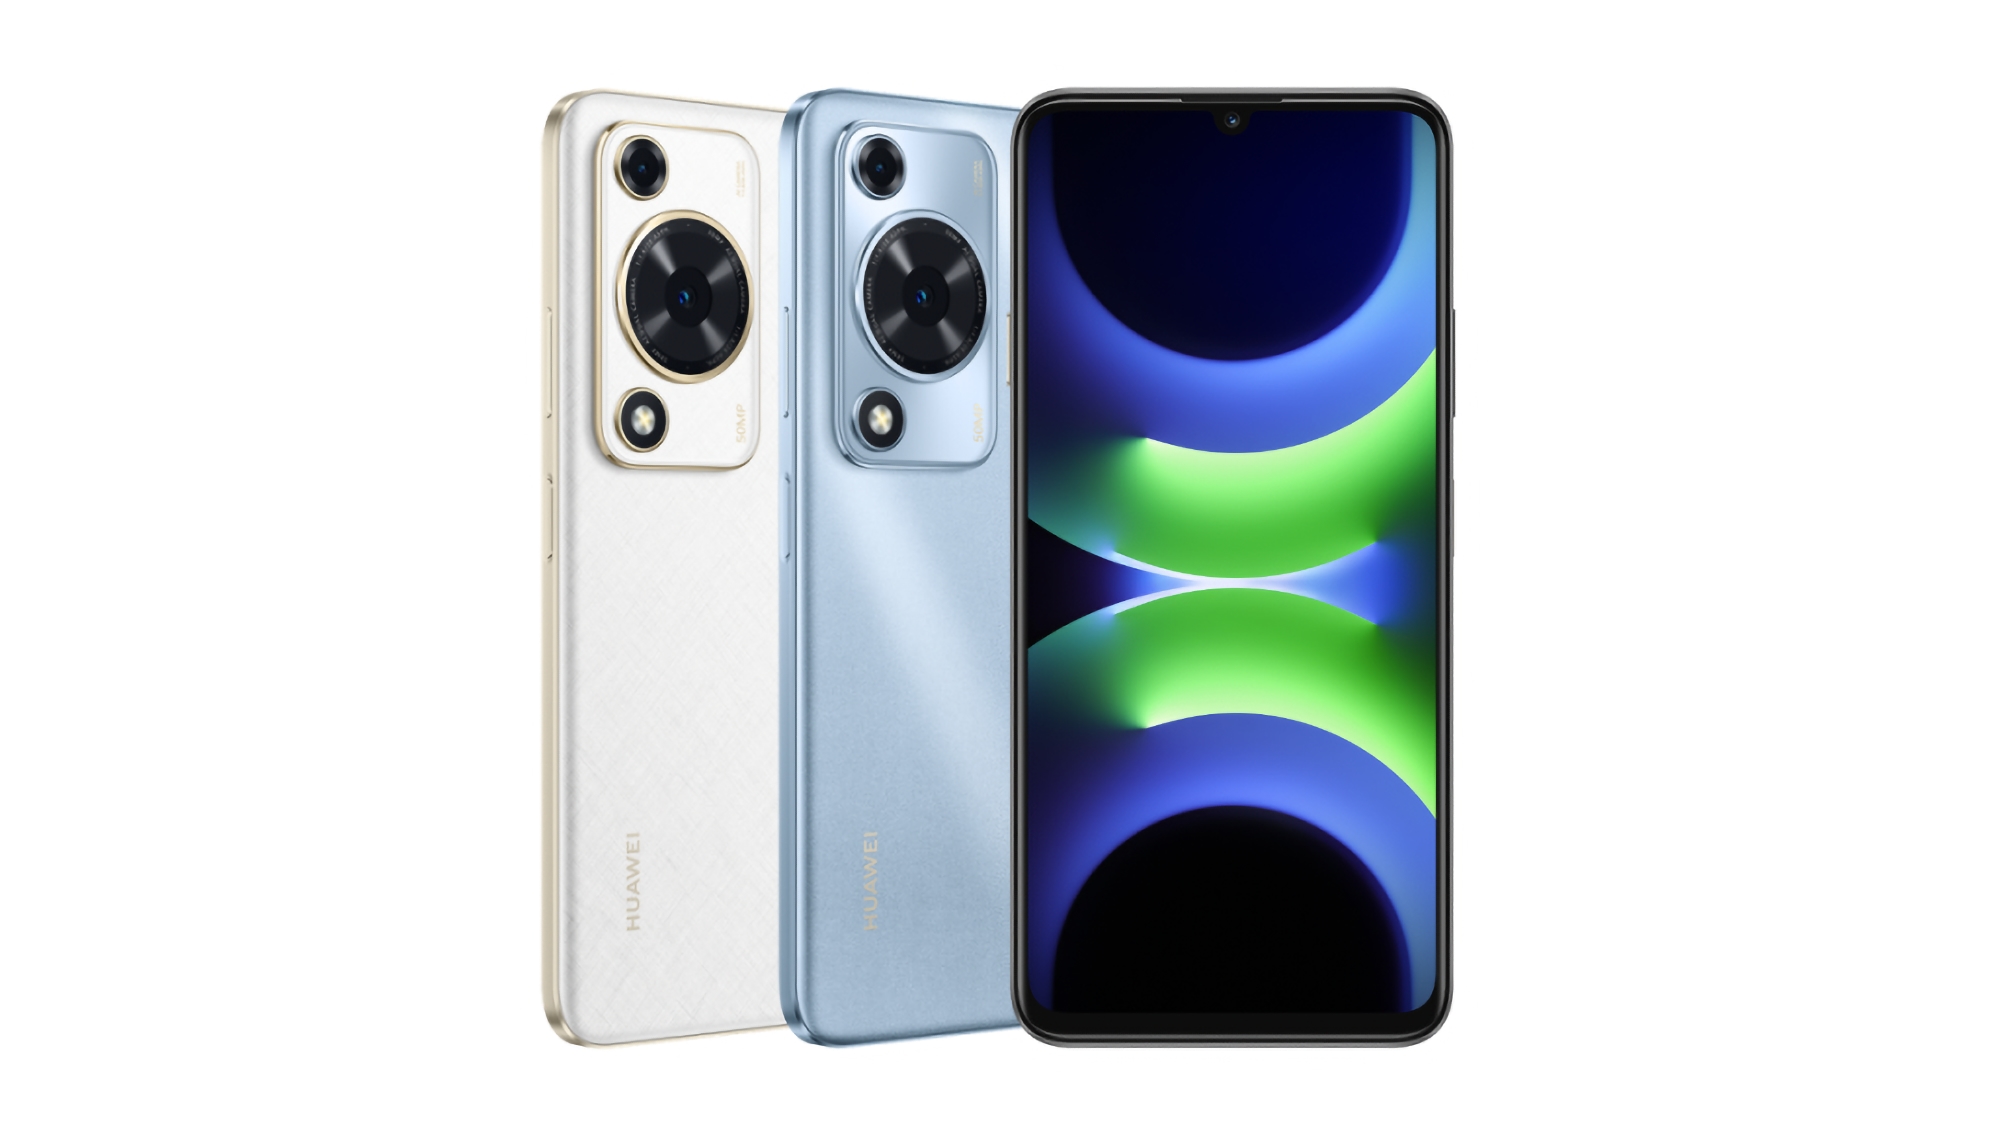 Huawei Enjoy 70s: a budget smartphone with 90Hz display, 6000mAh battery and design like the Huawei Pura 70 flagships